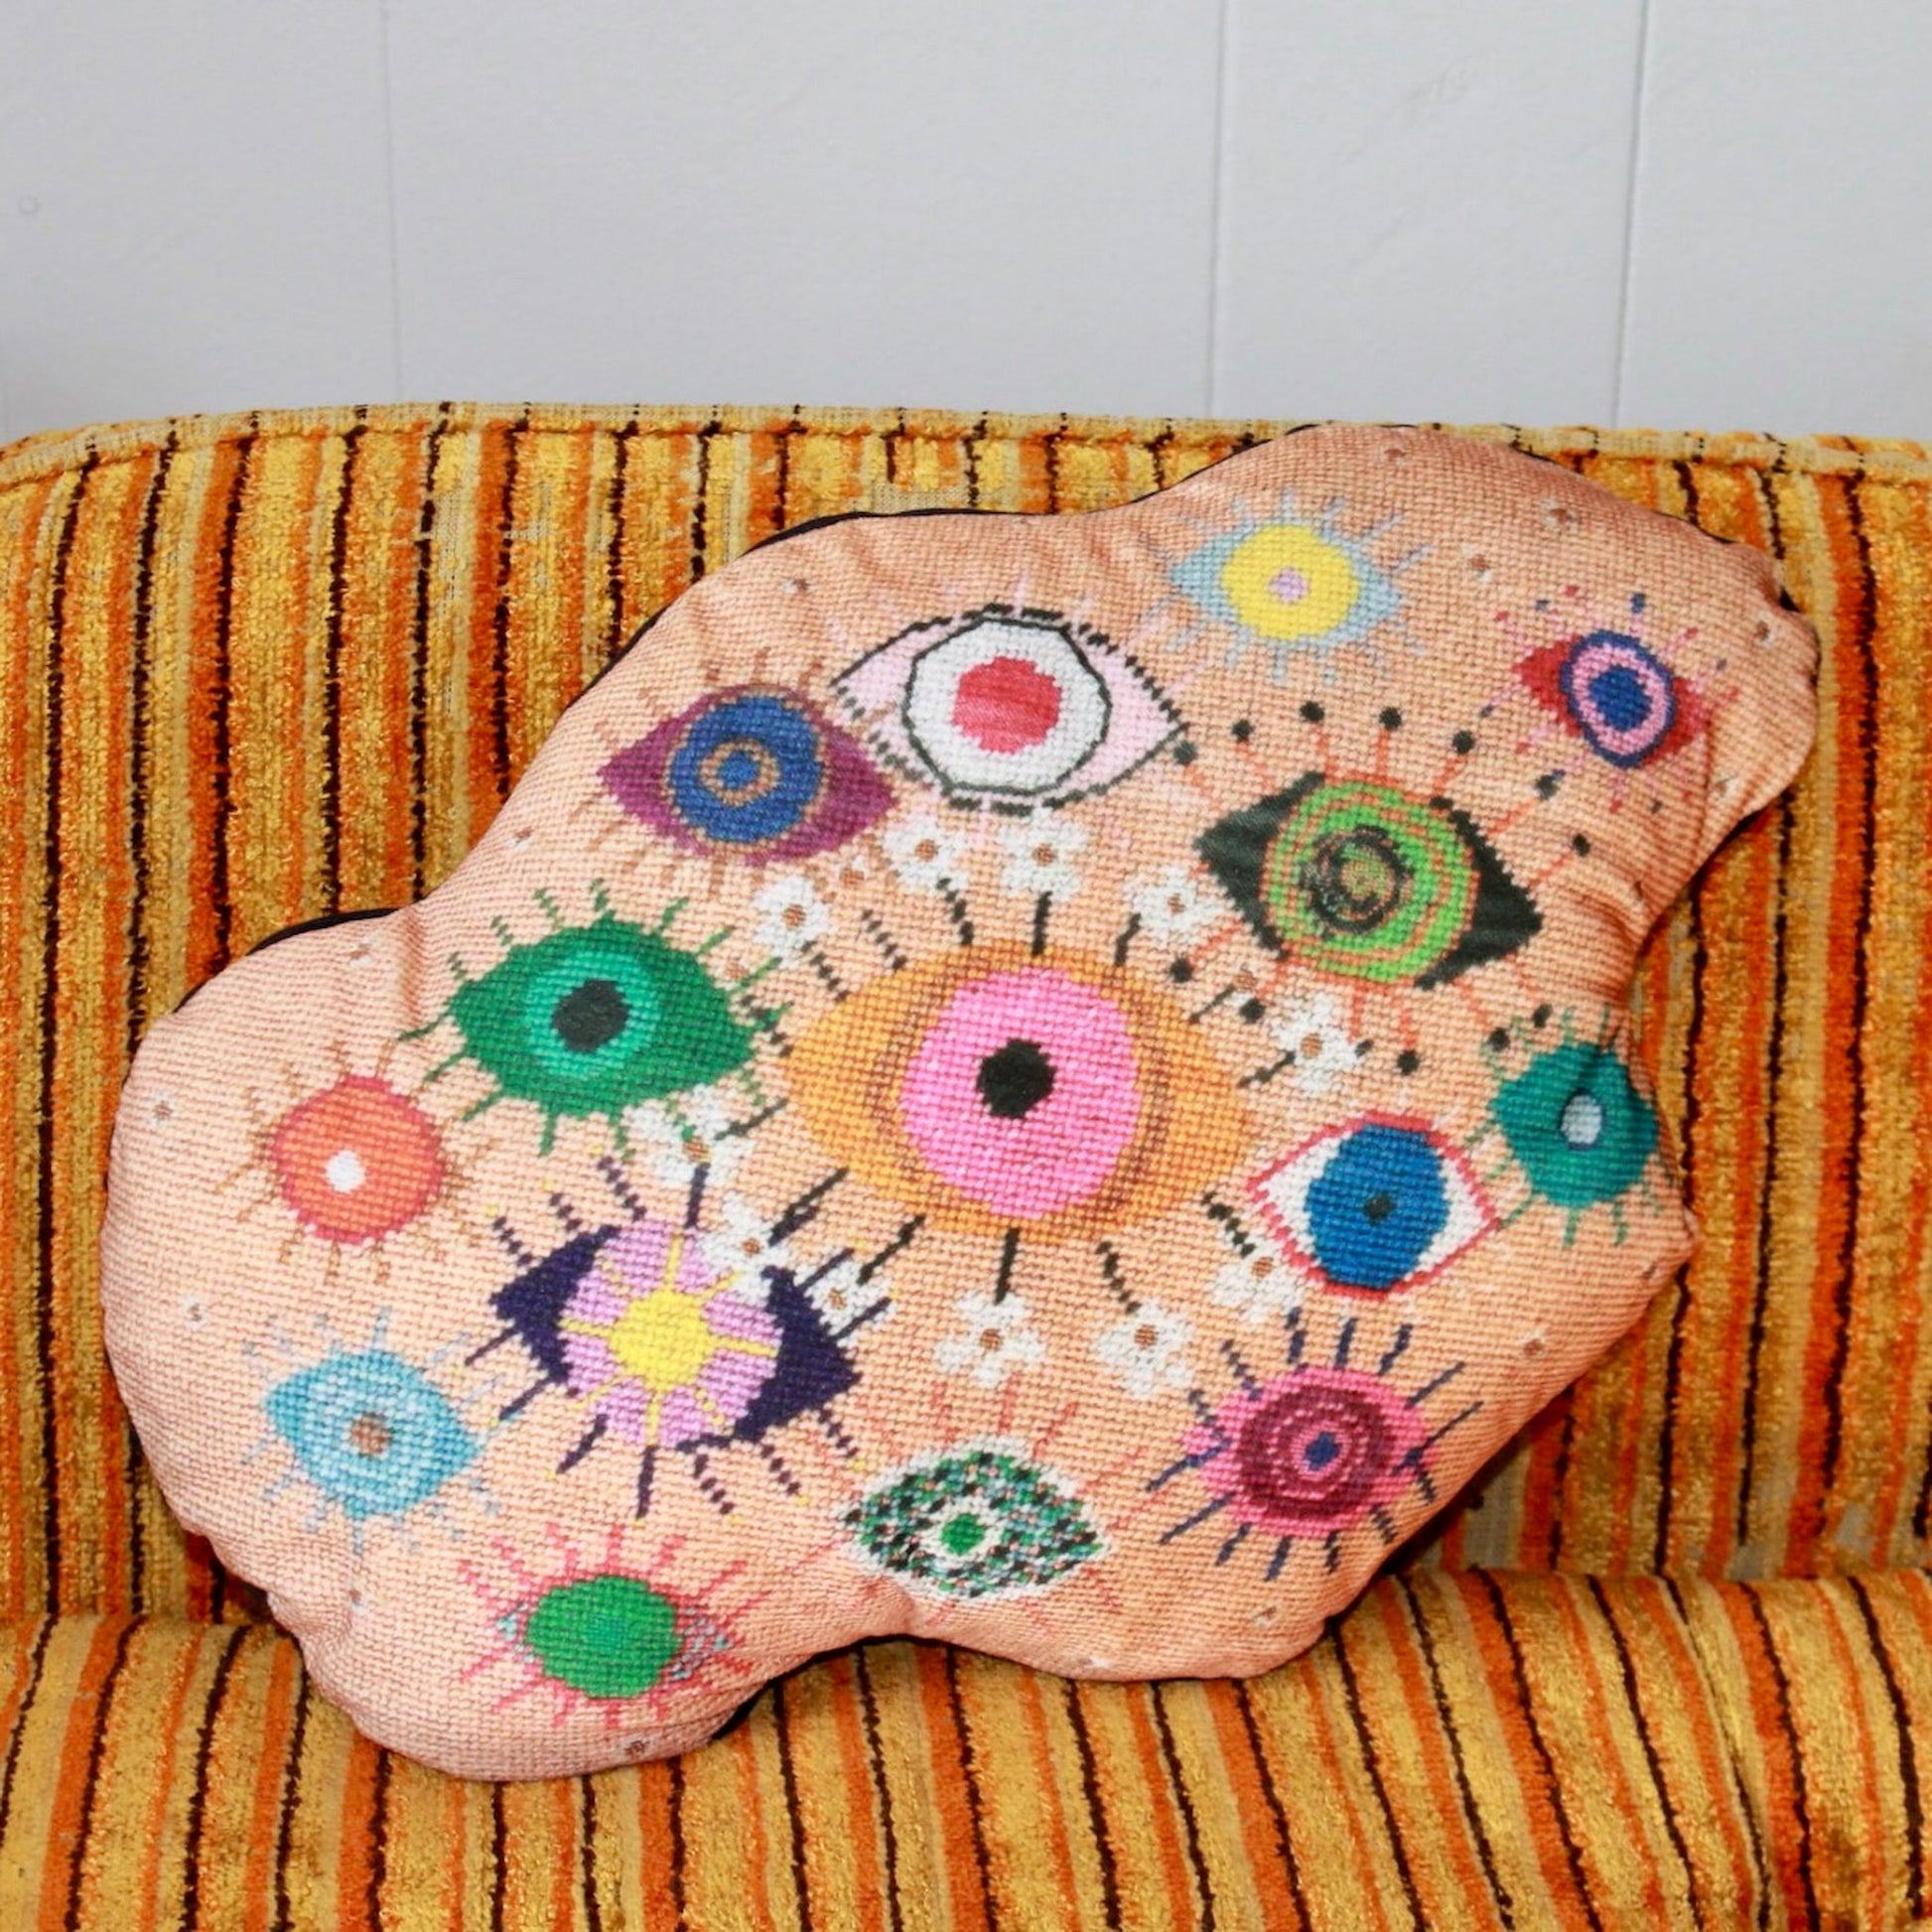 velvet amoeba-shaped pillow covered in fanciful, brightly-colored-eyes